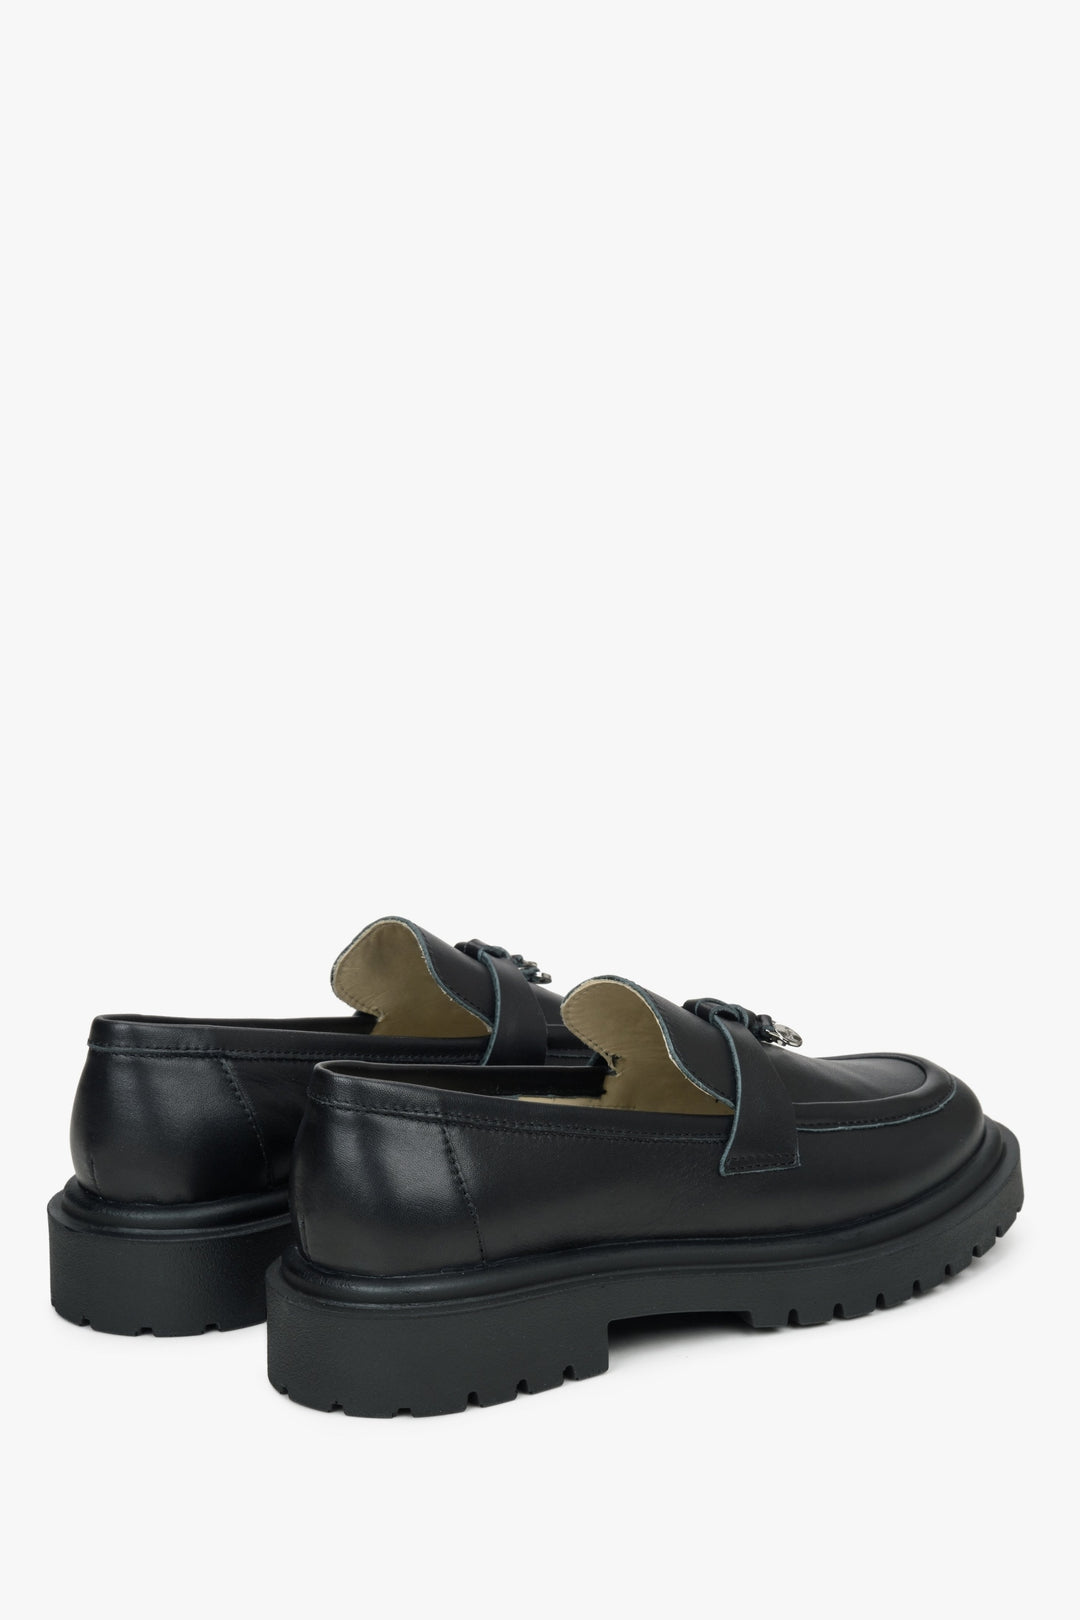 Women's black leather loafers by Estro - close-up of the heel counter and side profile of the shoe.